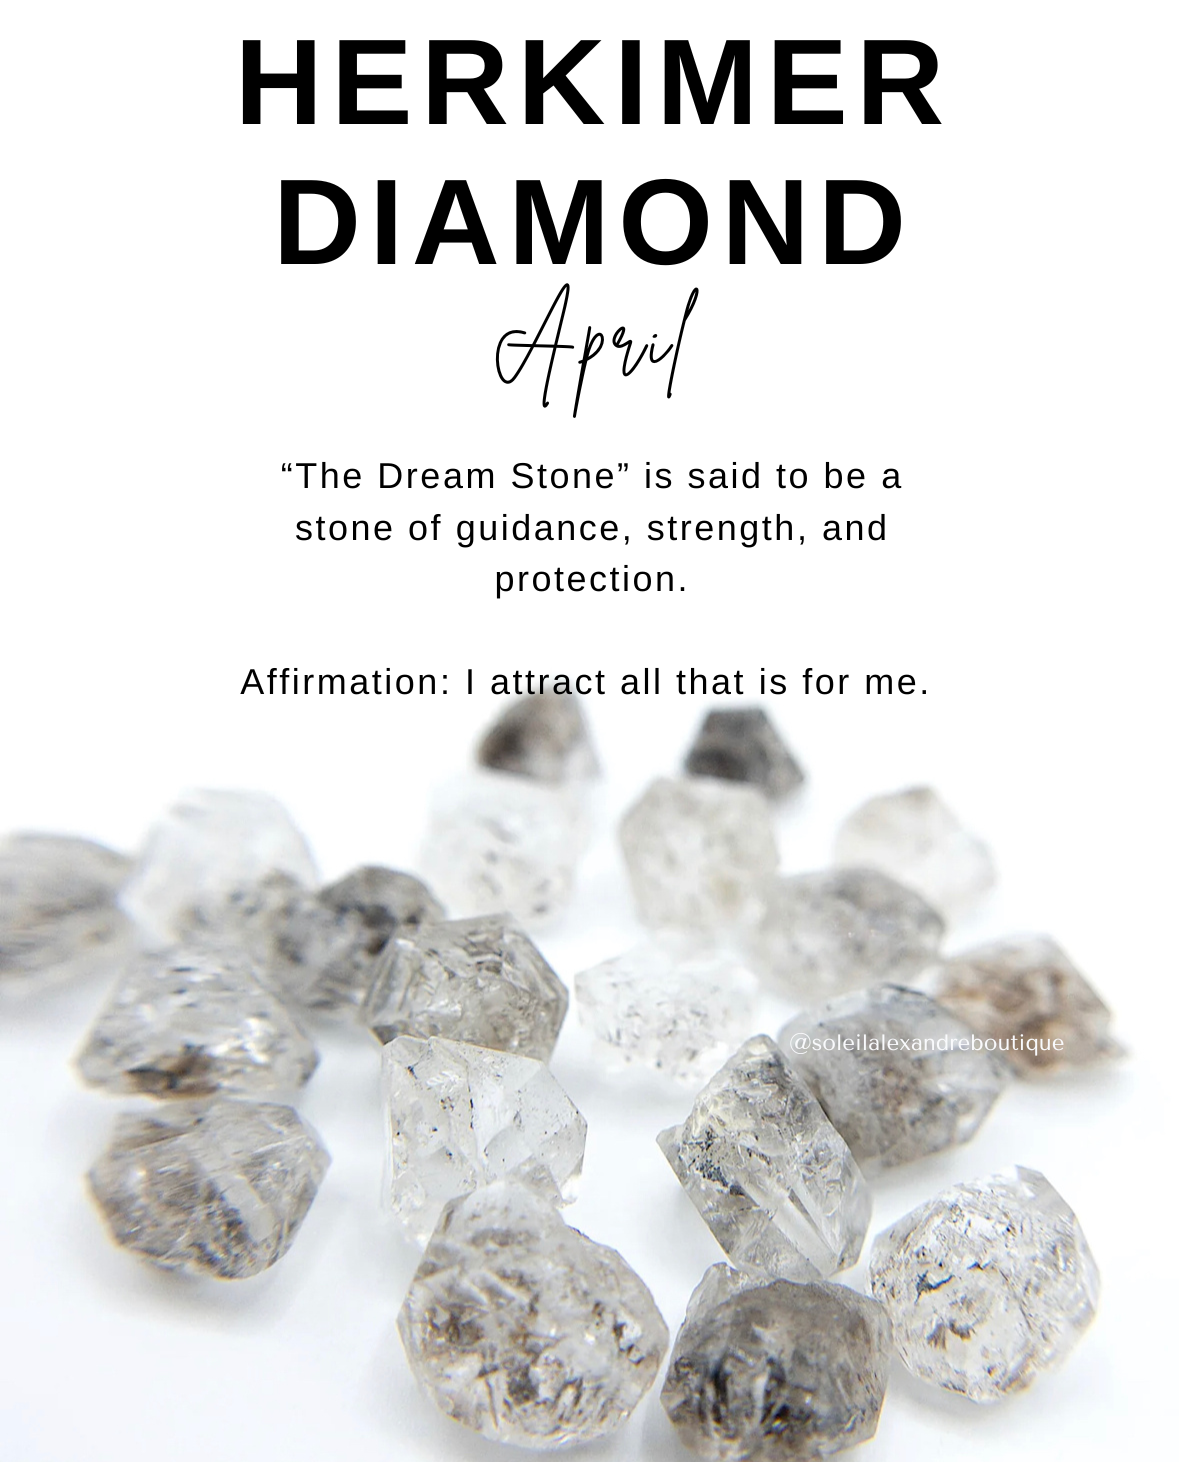 Herkimer Diamond information card with affirmation.